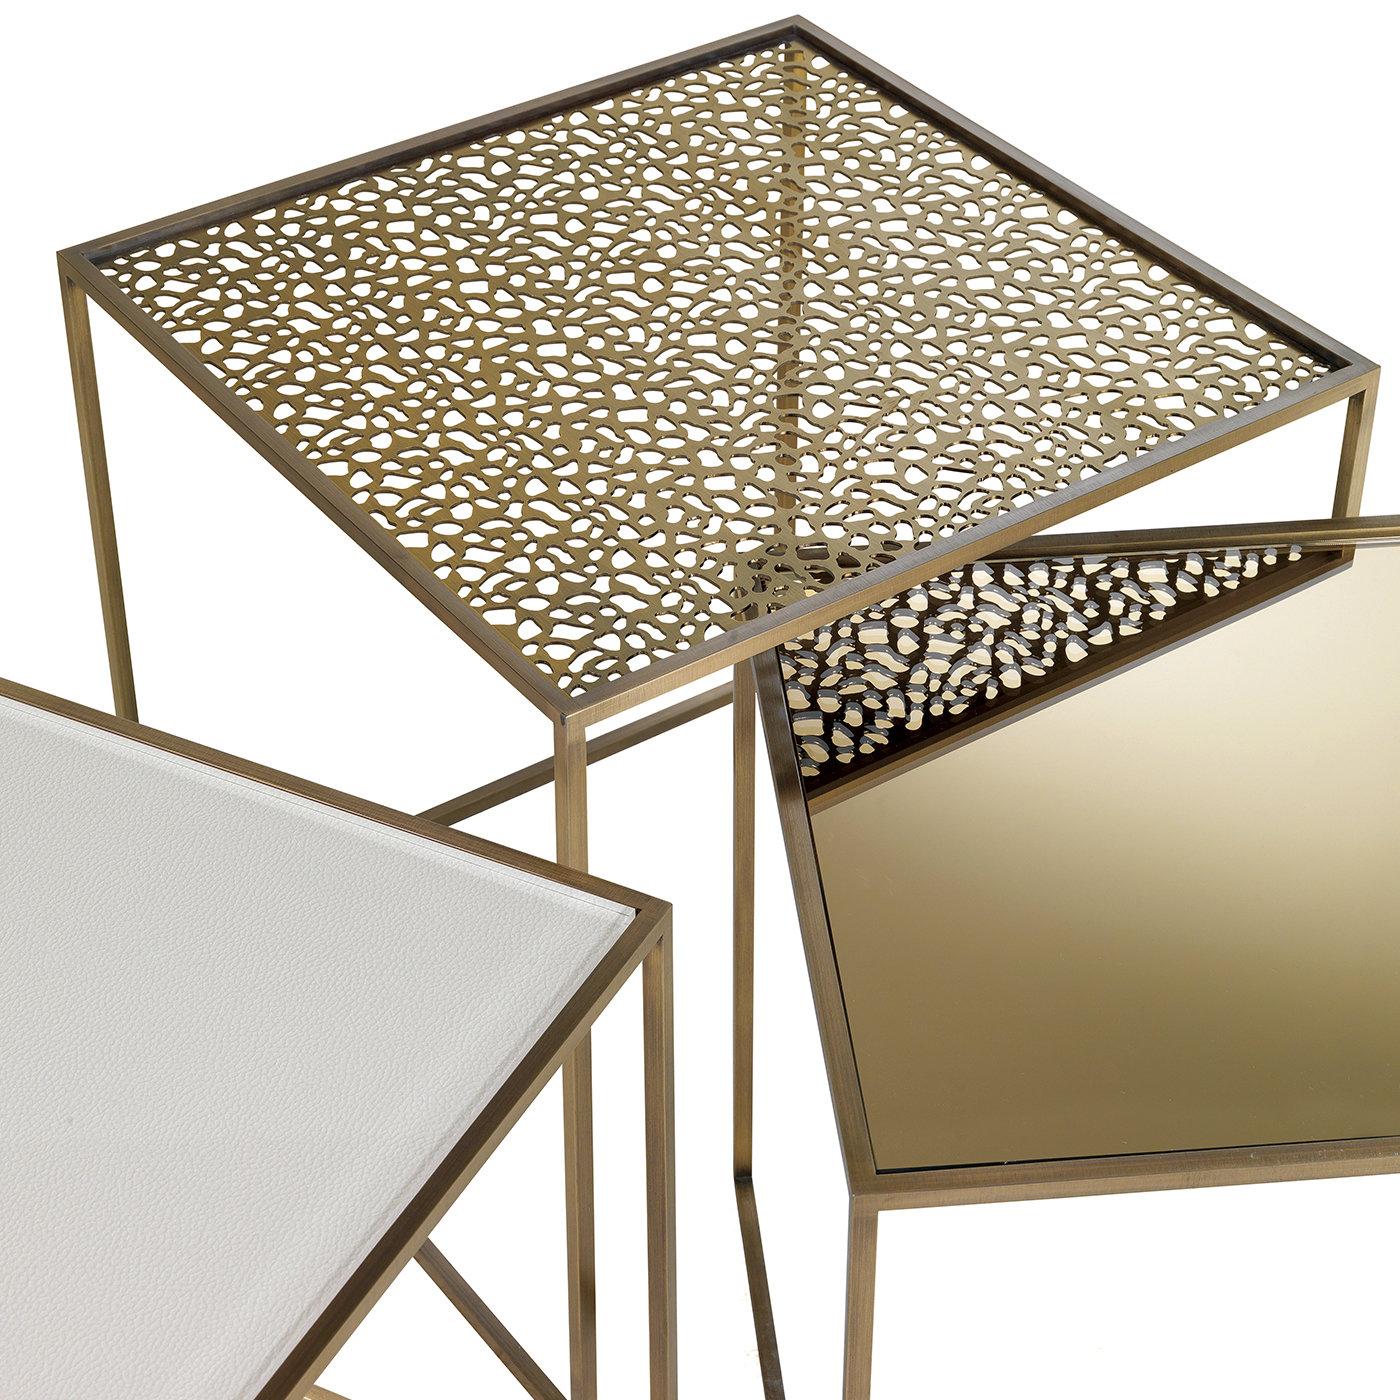 Part of the Friends collection of side tables, this piece will be an exquisite addition to a contemporary living room. Its square structure is made entirely of brass and comprises a base on three sides that supports a fretwork top. The irregular,